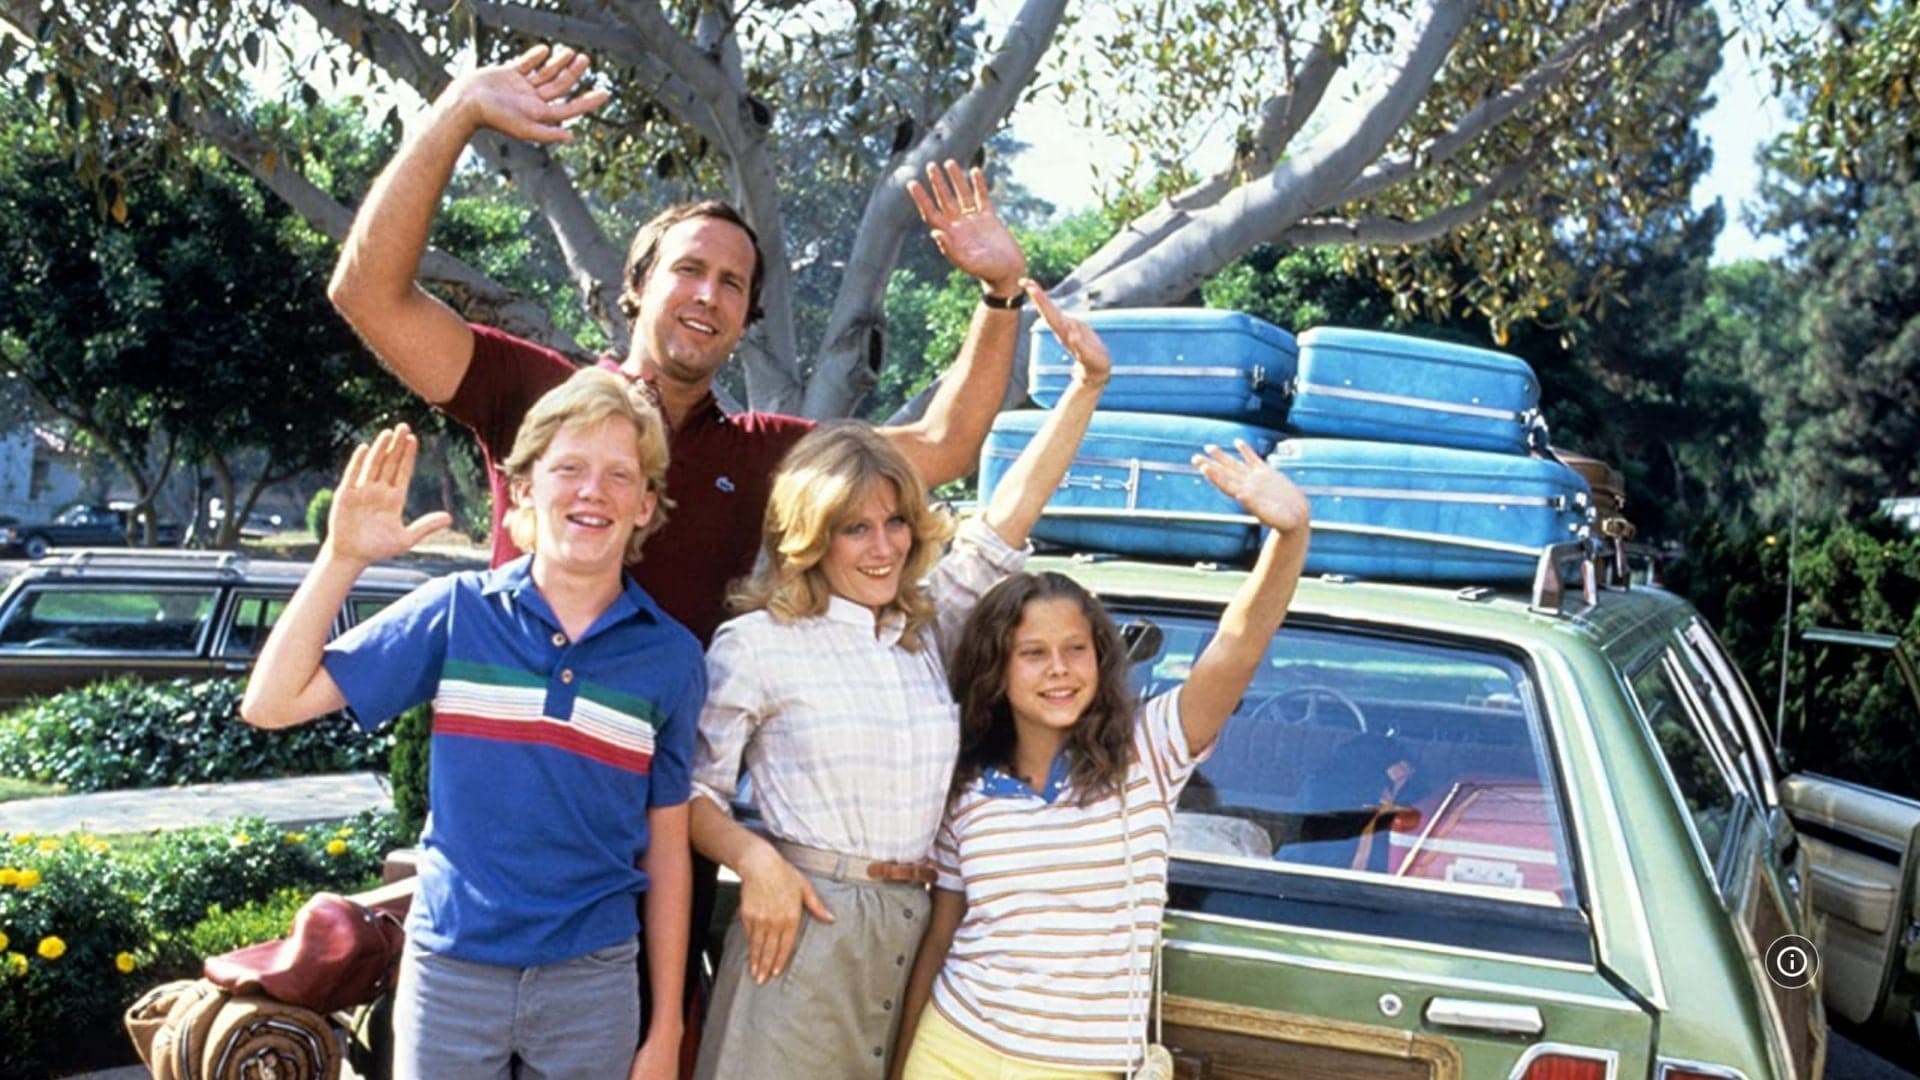 What’s Your Favorite Family Road Trip Memory?